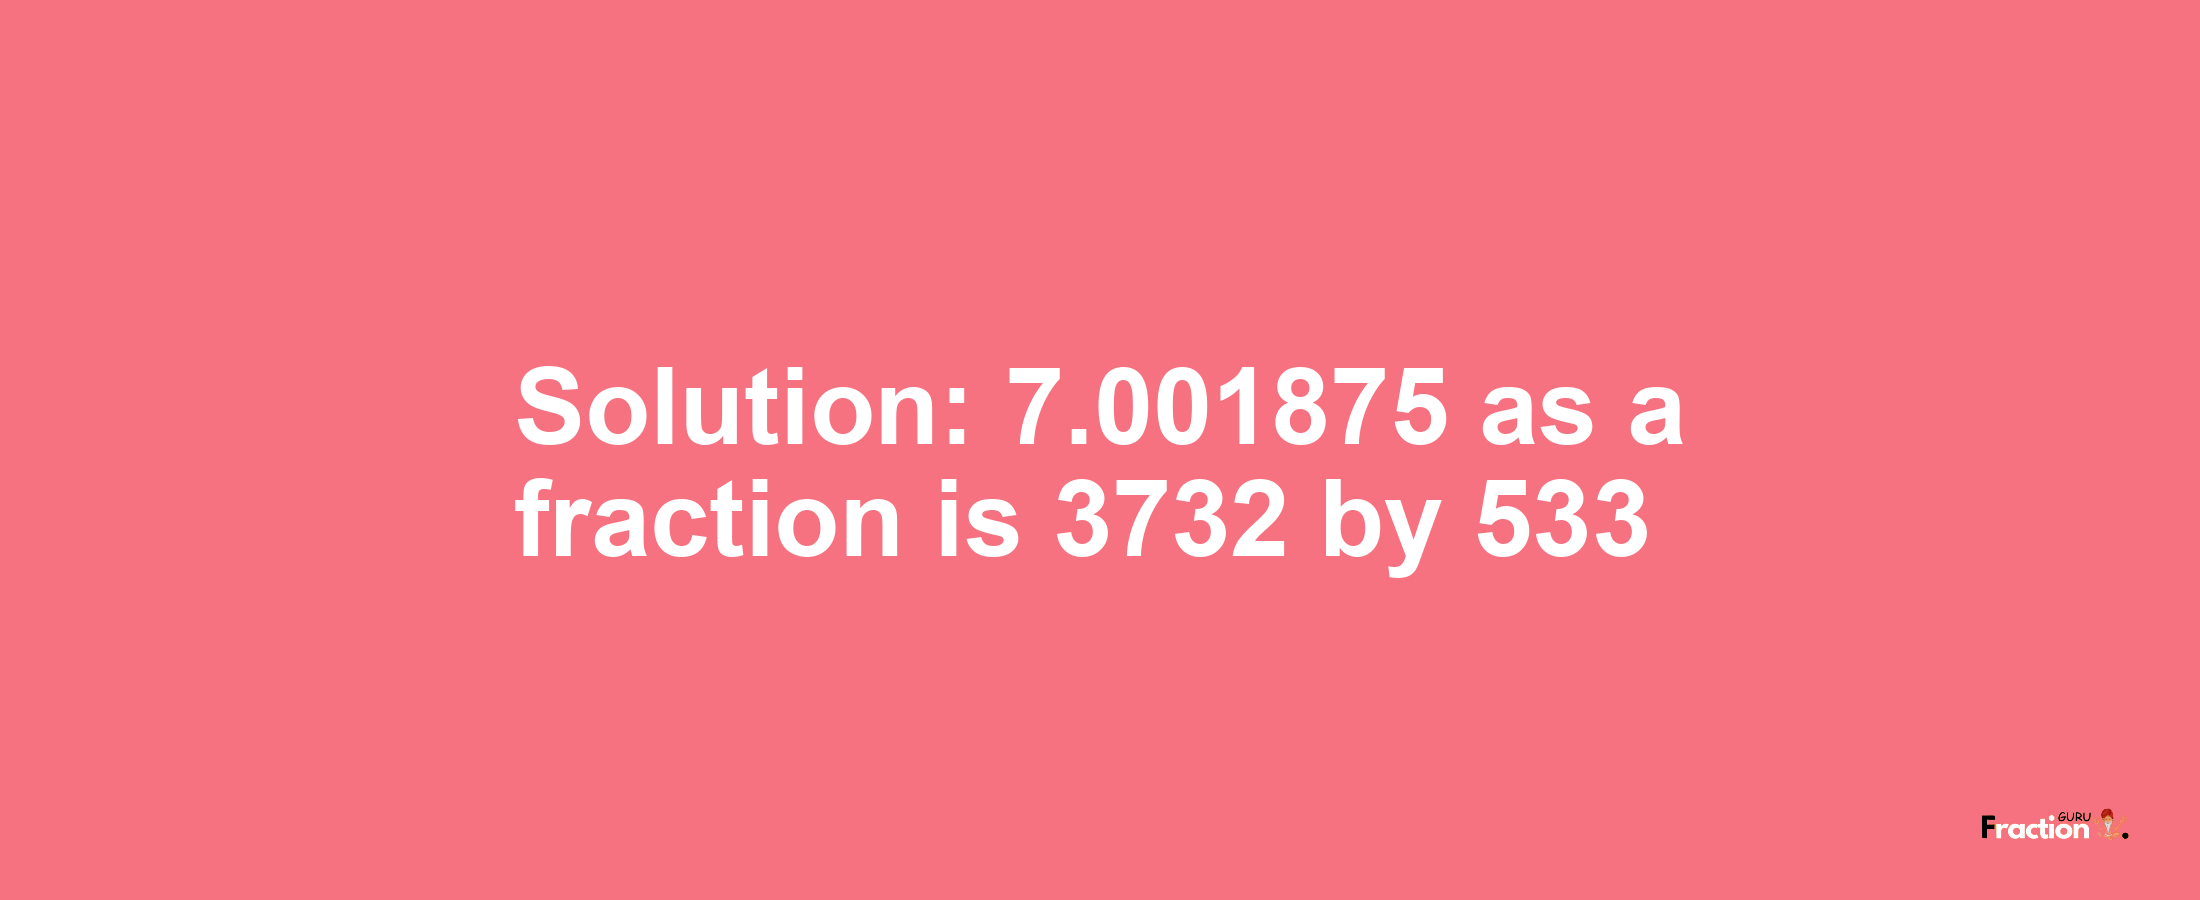 Solution:7.001875 as a fraction is 3732/533